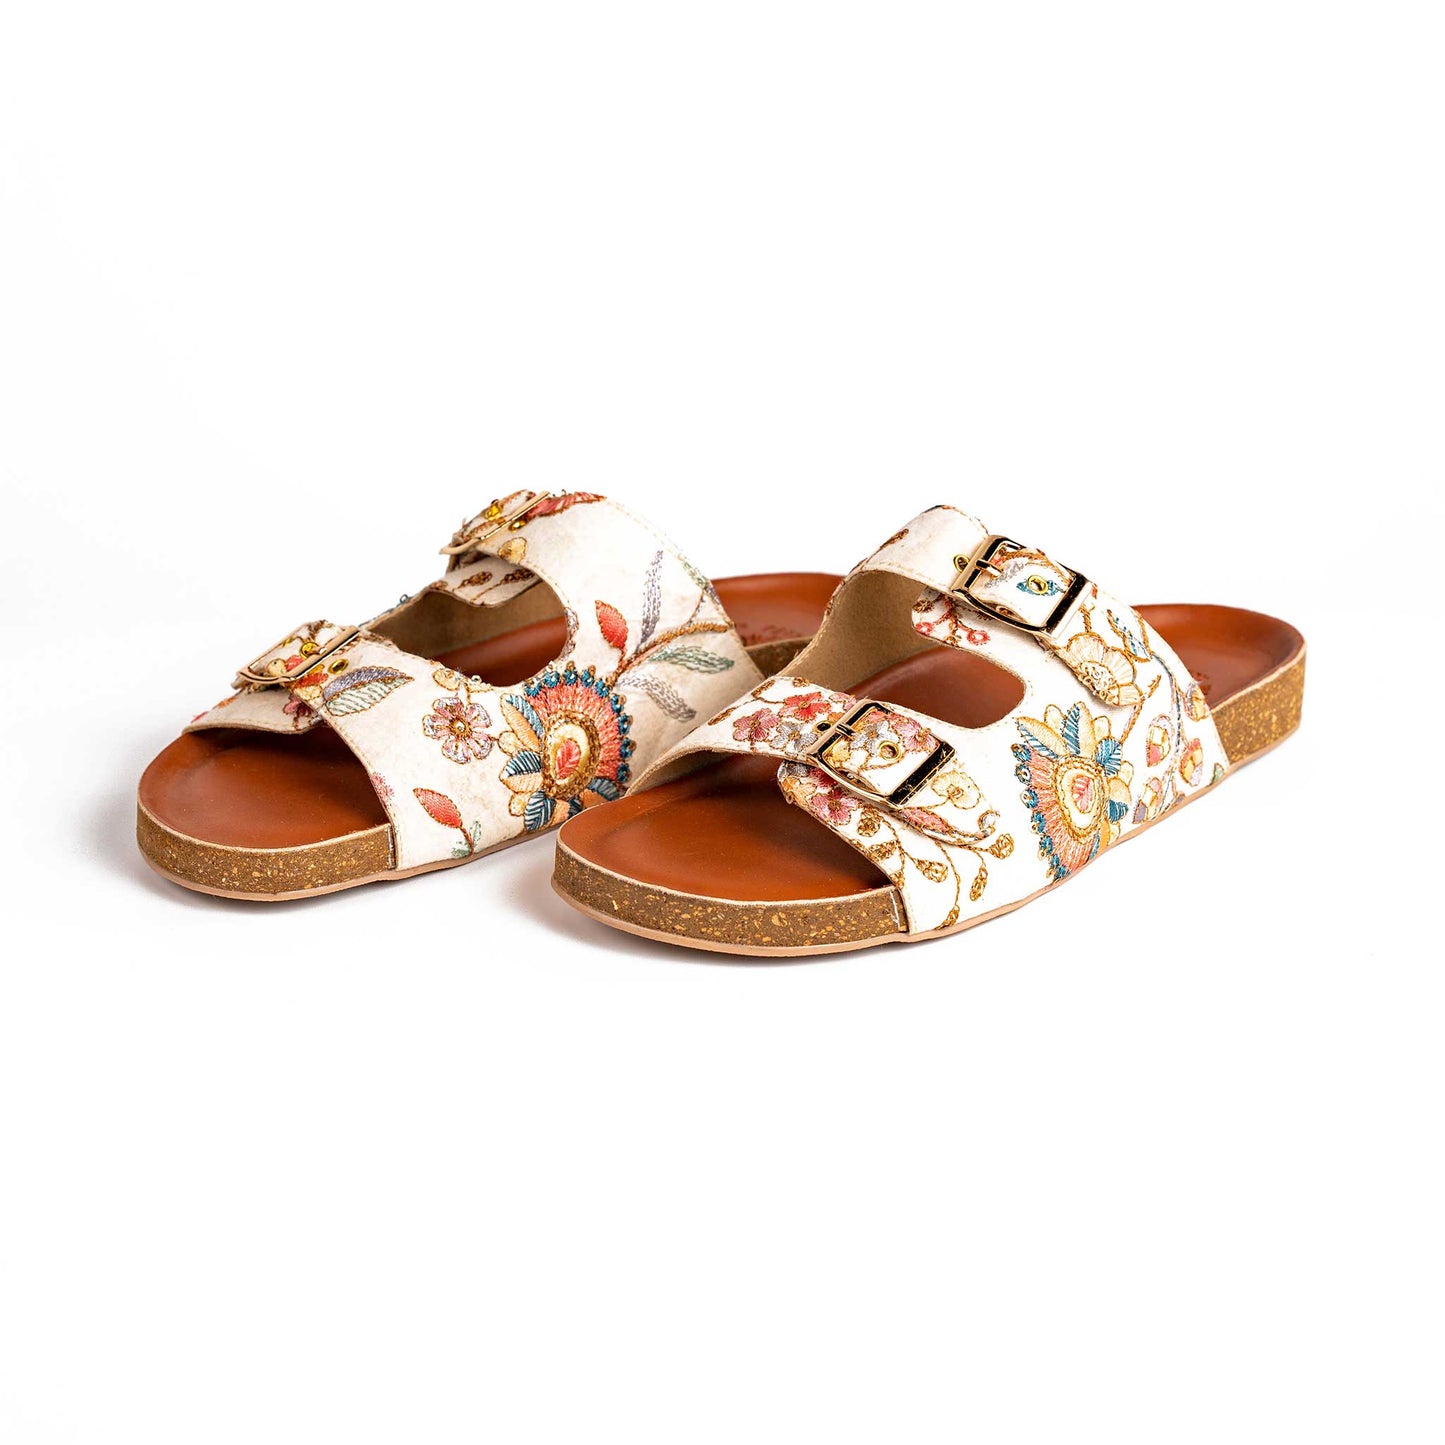 Floral Embroidered Buckled Sandals